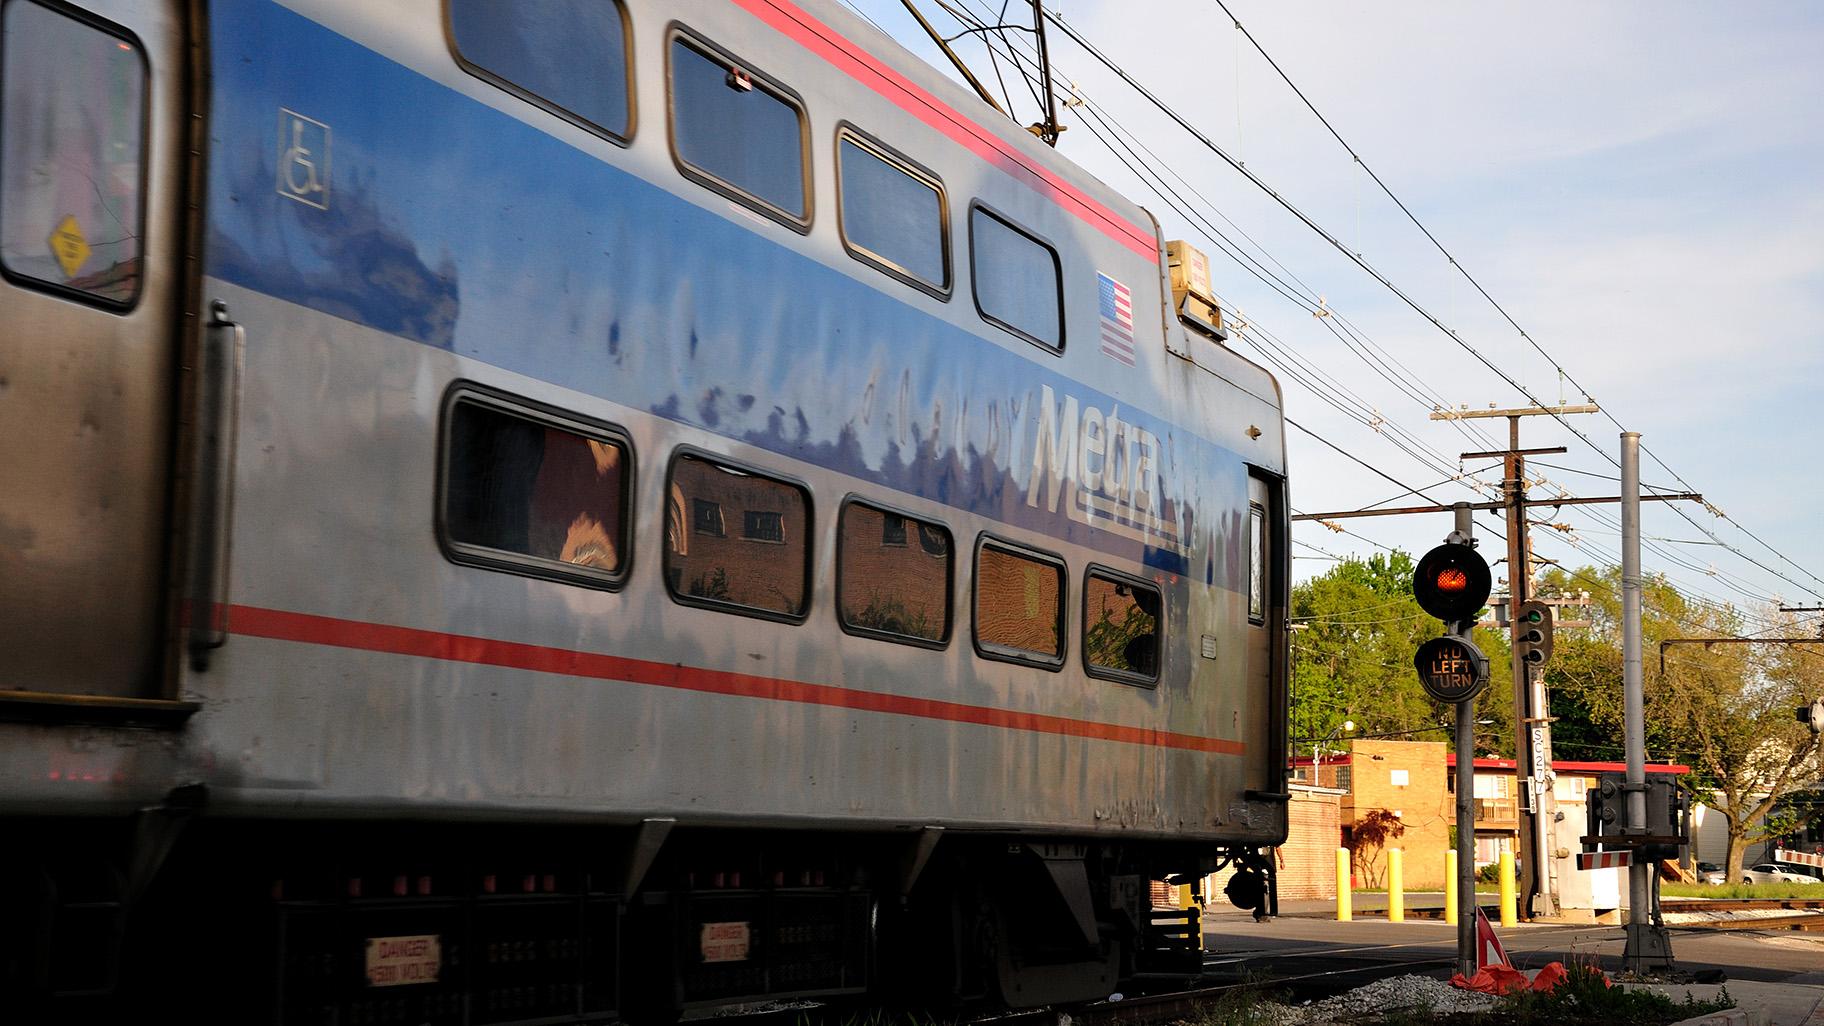 A southbound Metra Electric District train departs 79th Street station. (vxla / Flickr)